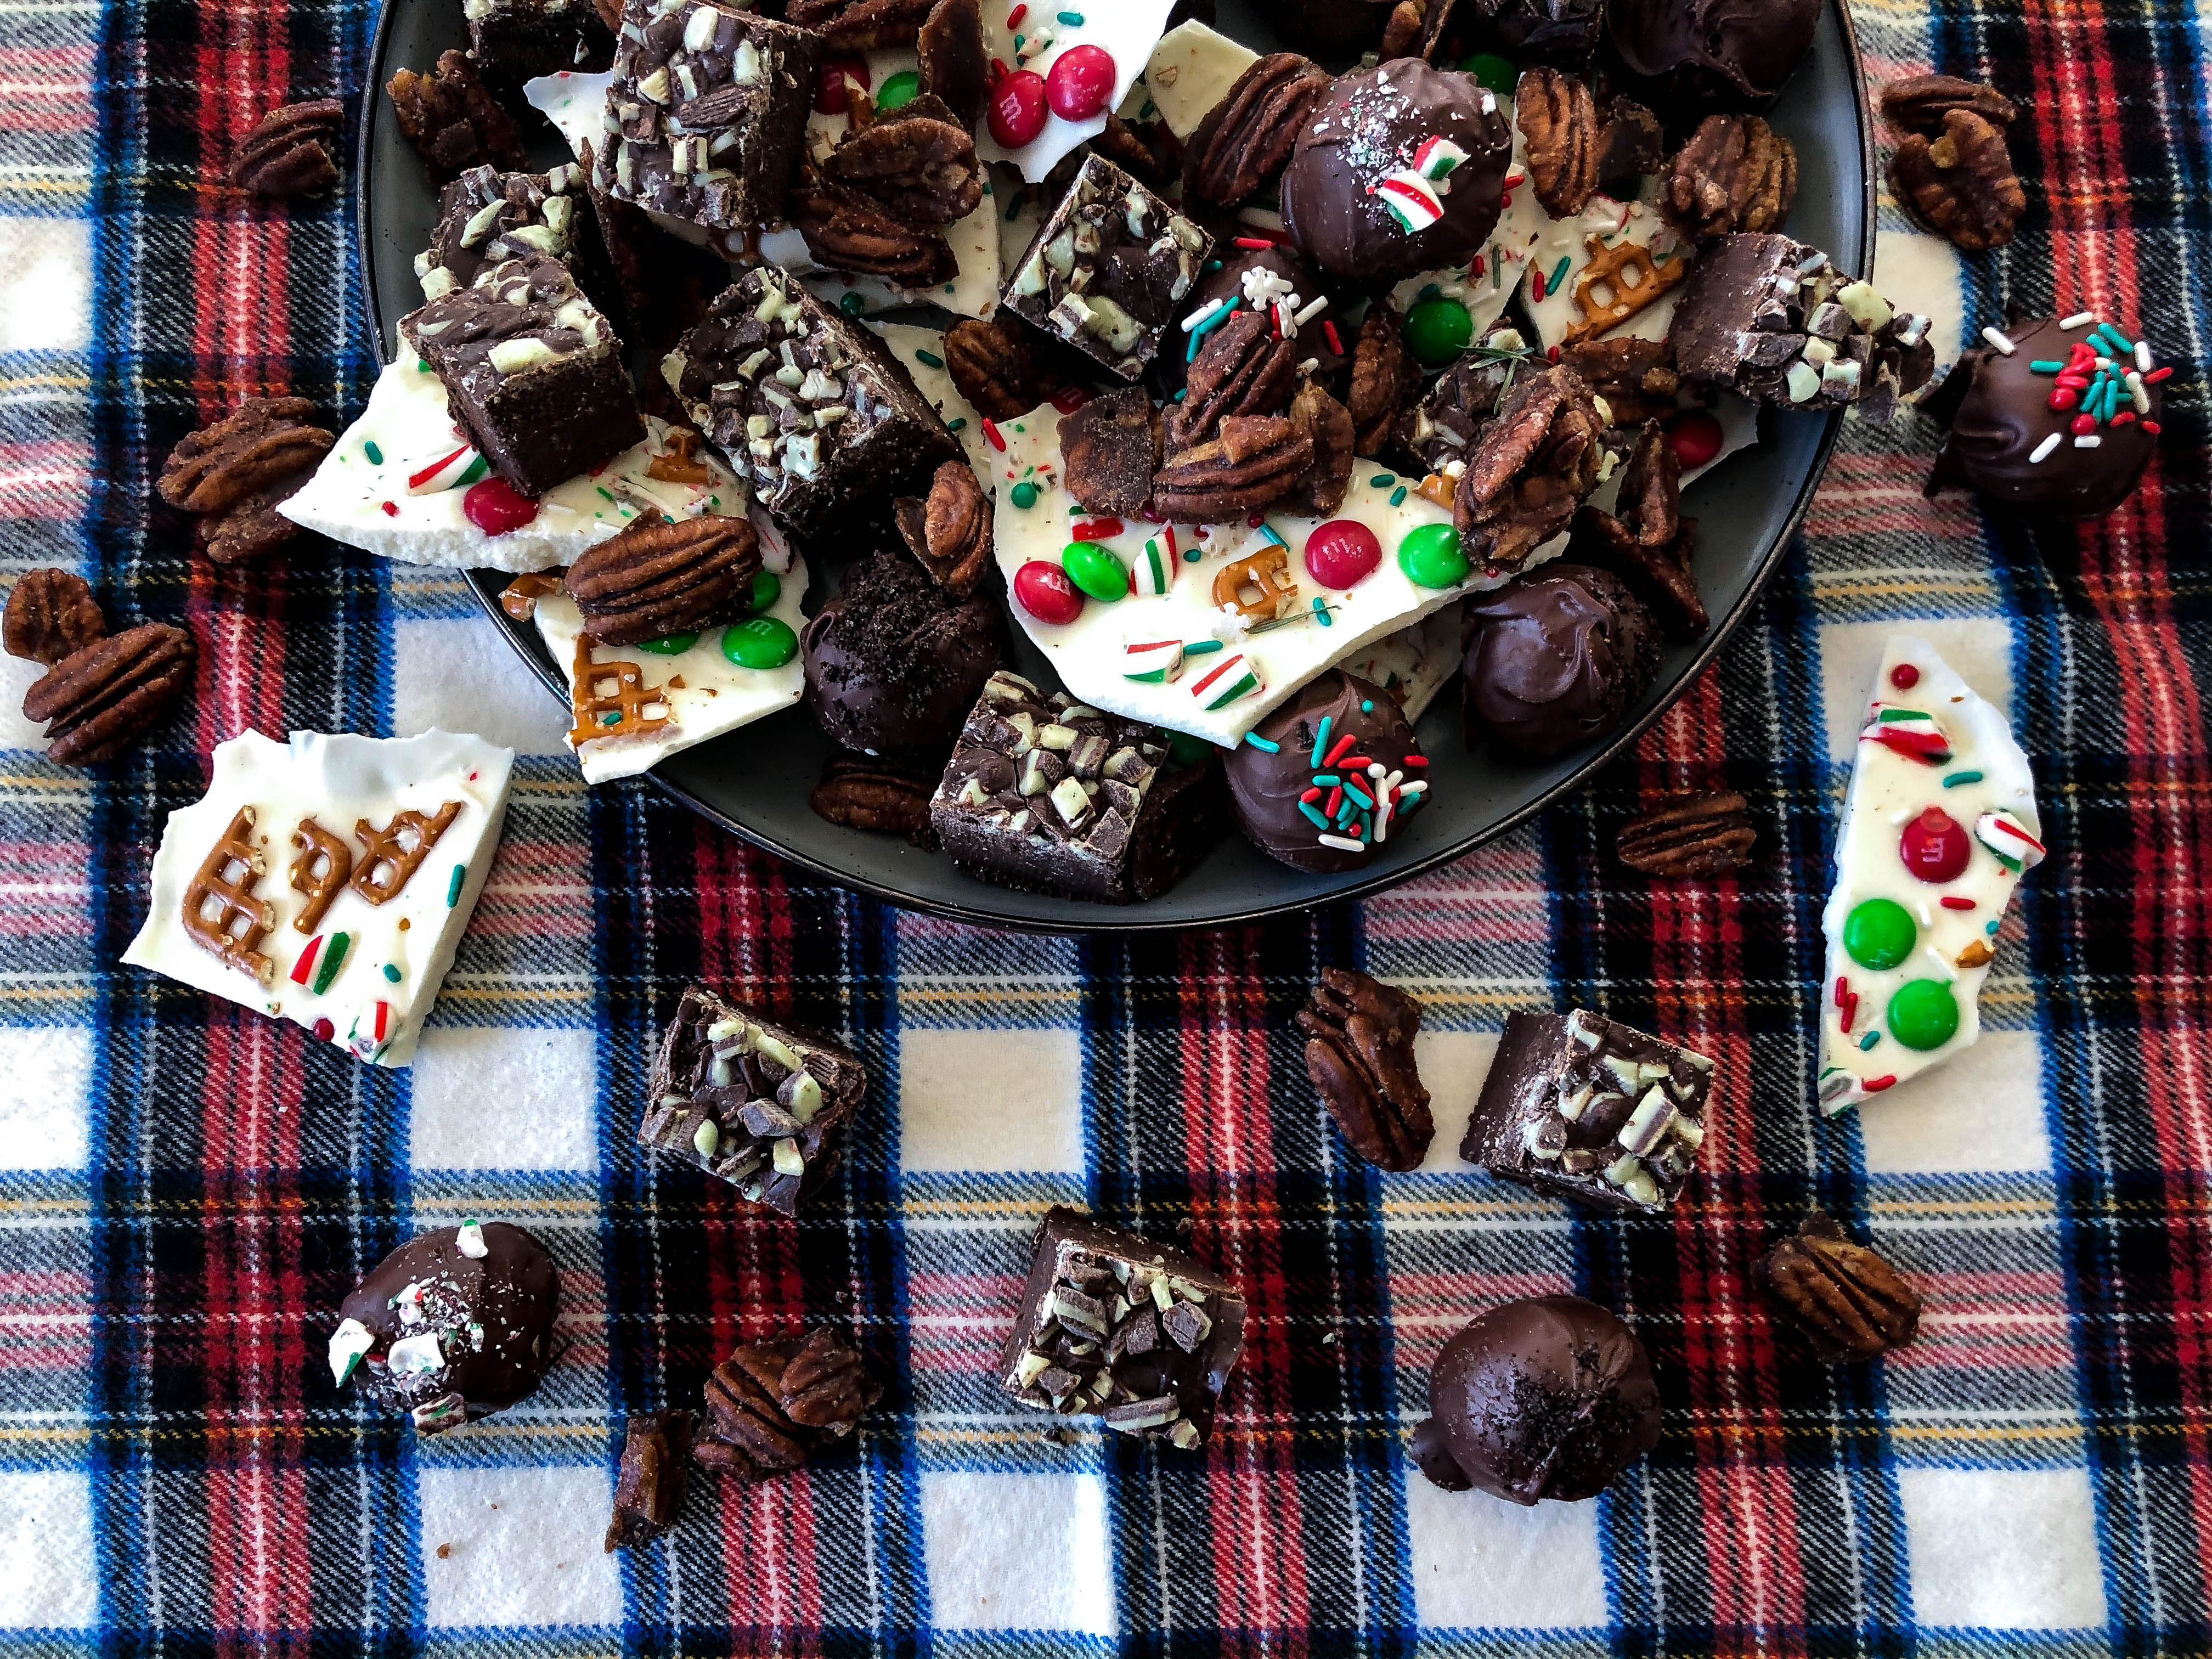 A variety of holiday sweets in a bowl